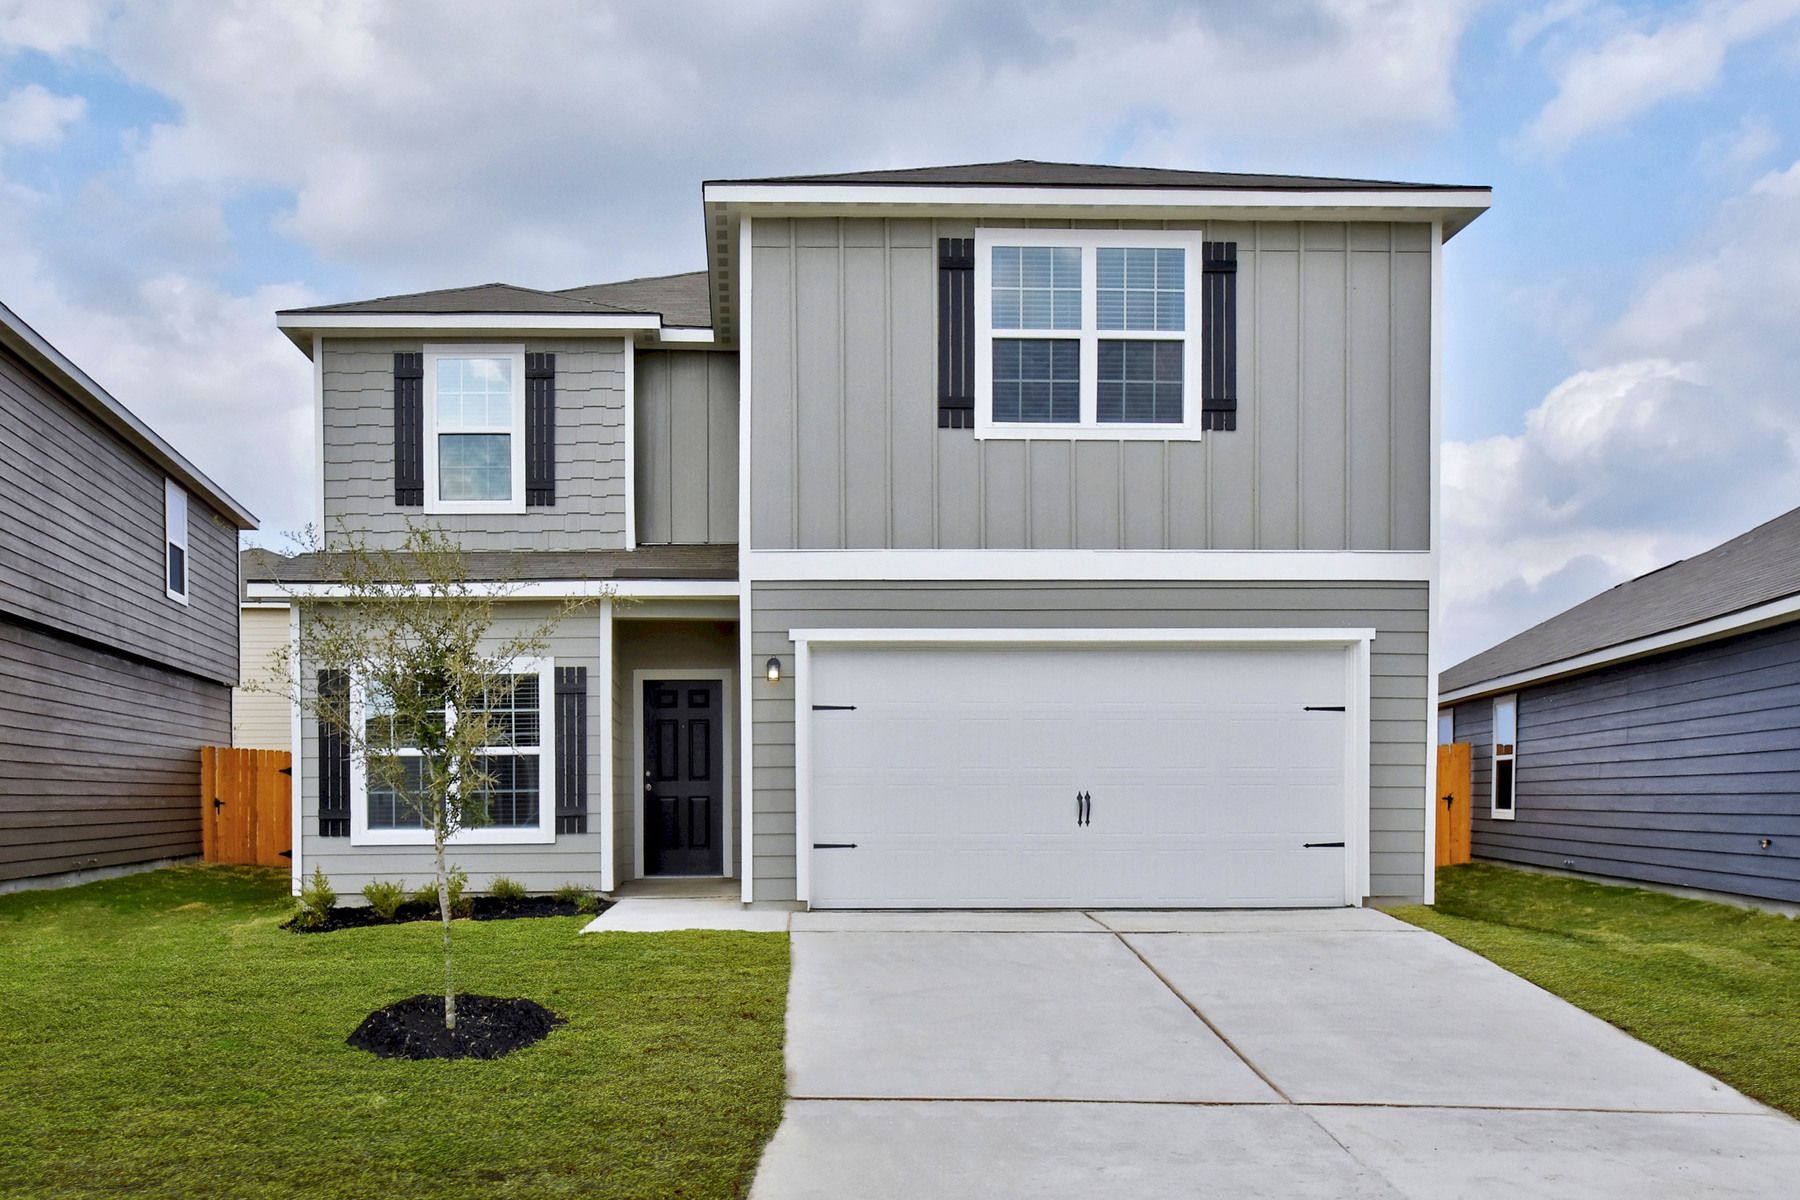 LGI Homes at Savannah Place:The Travis plan has the space you need!